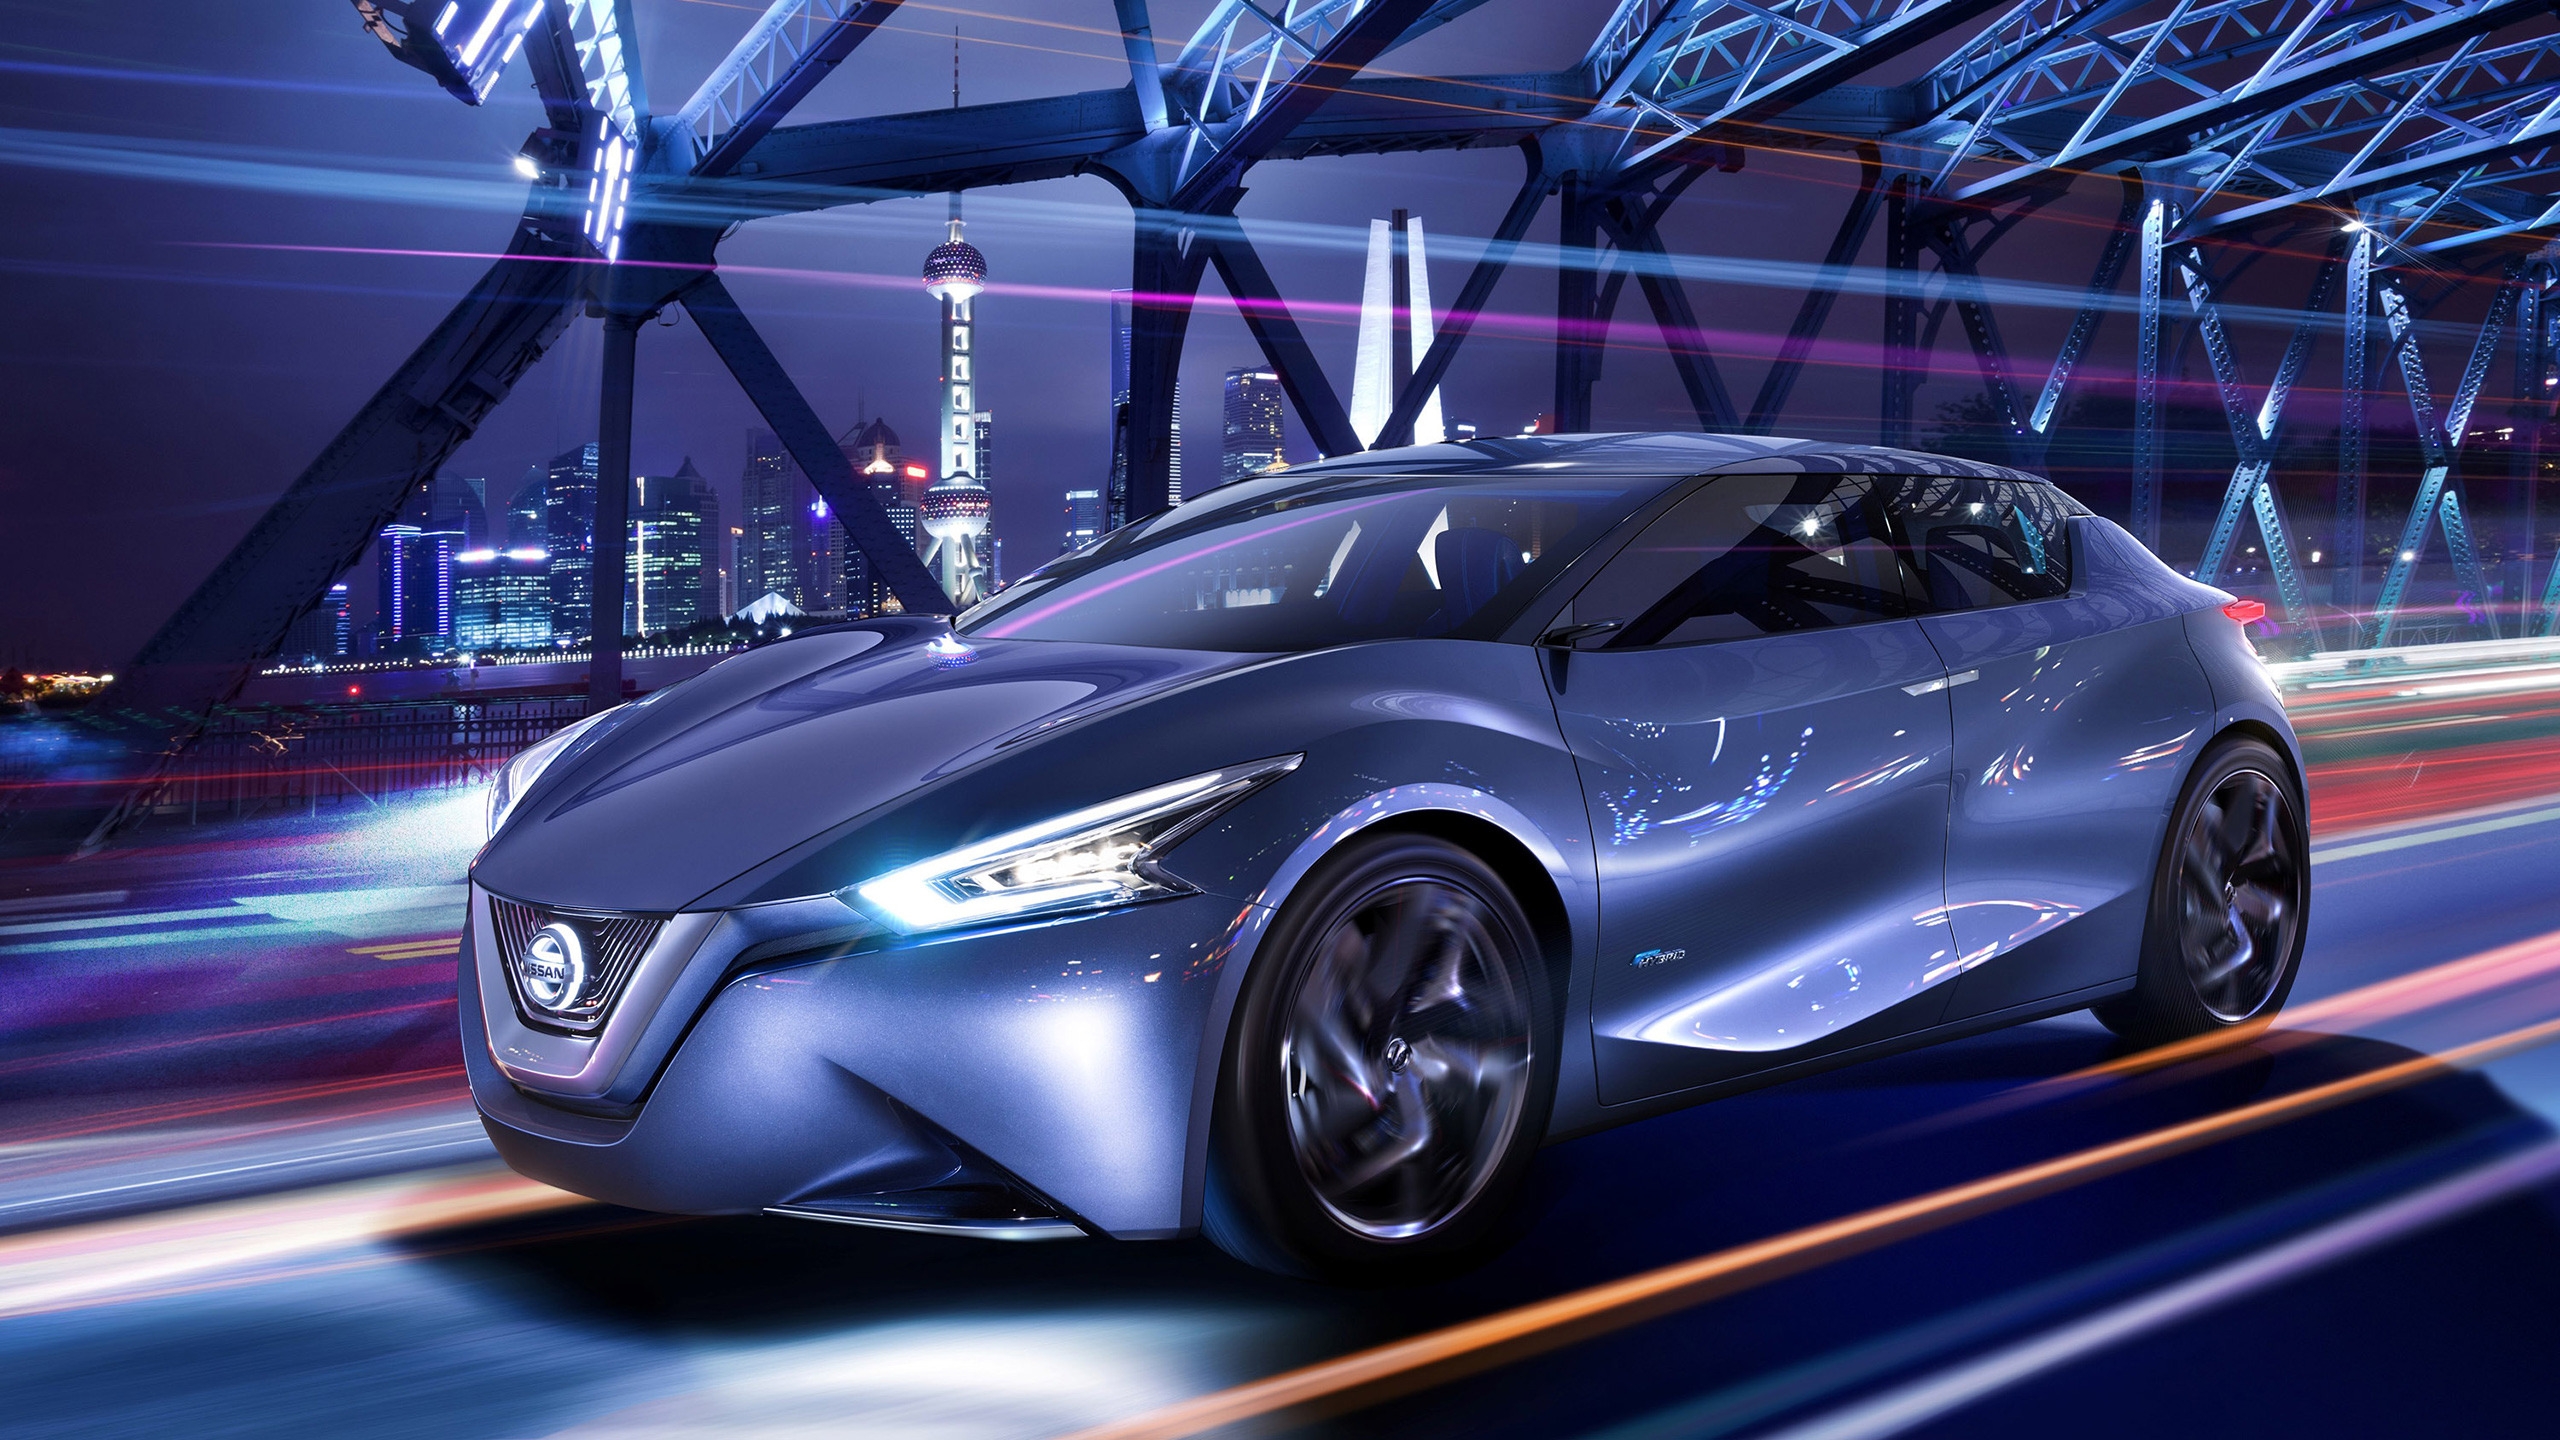 Nissan Friend Me Concept for 2560x1440 HDTV resolution